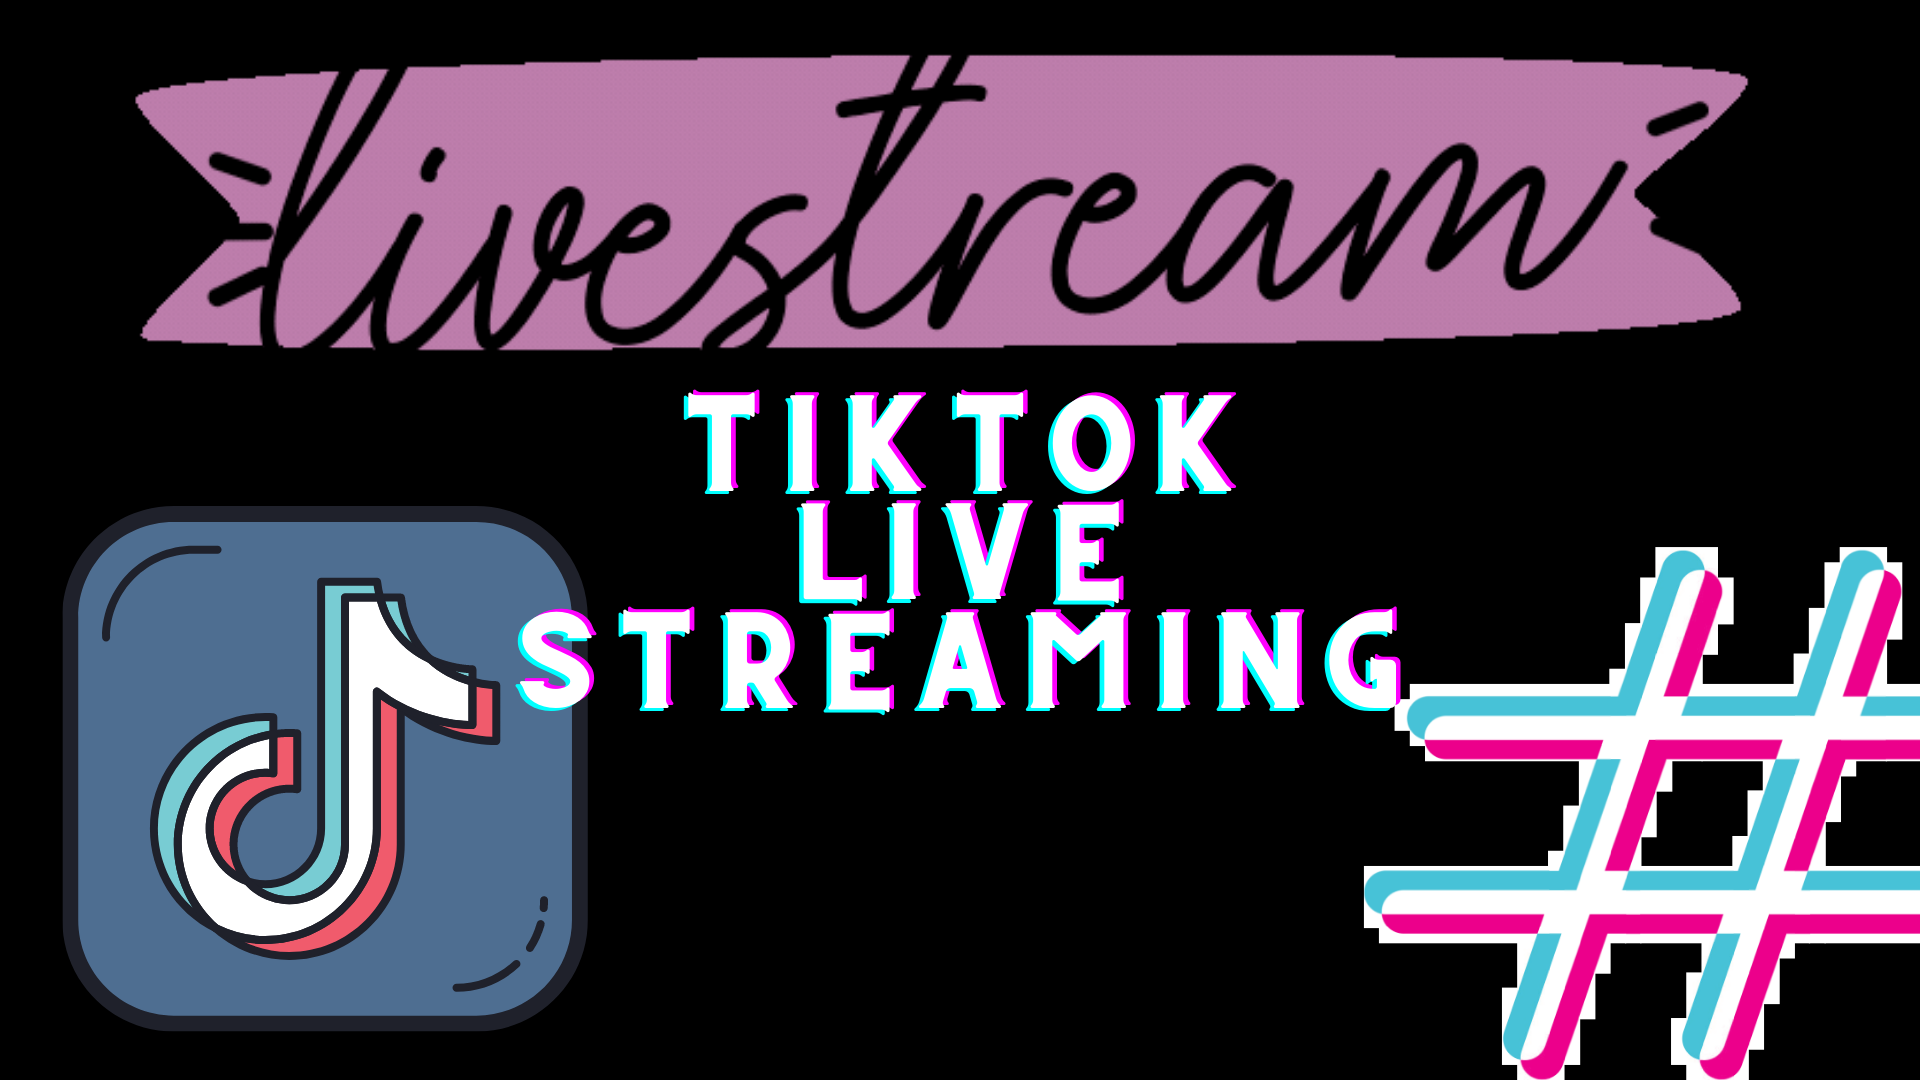 How to Start Your TikTok Live Streaming in Malaysia?